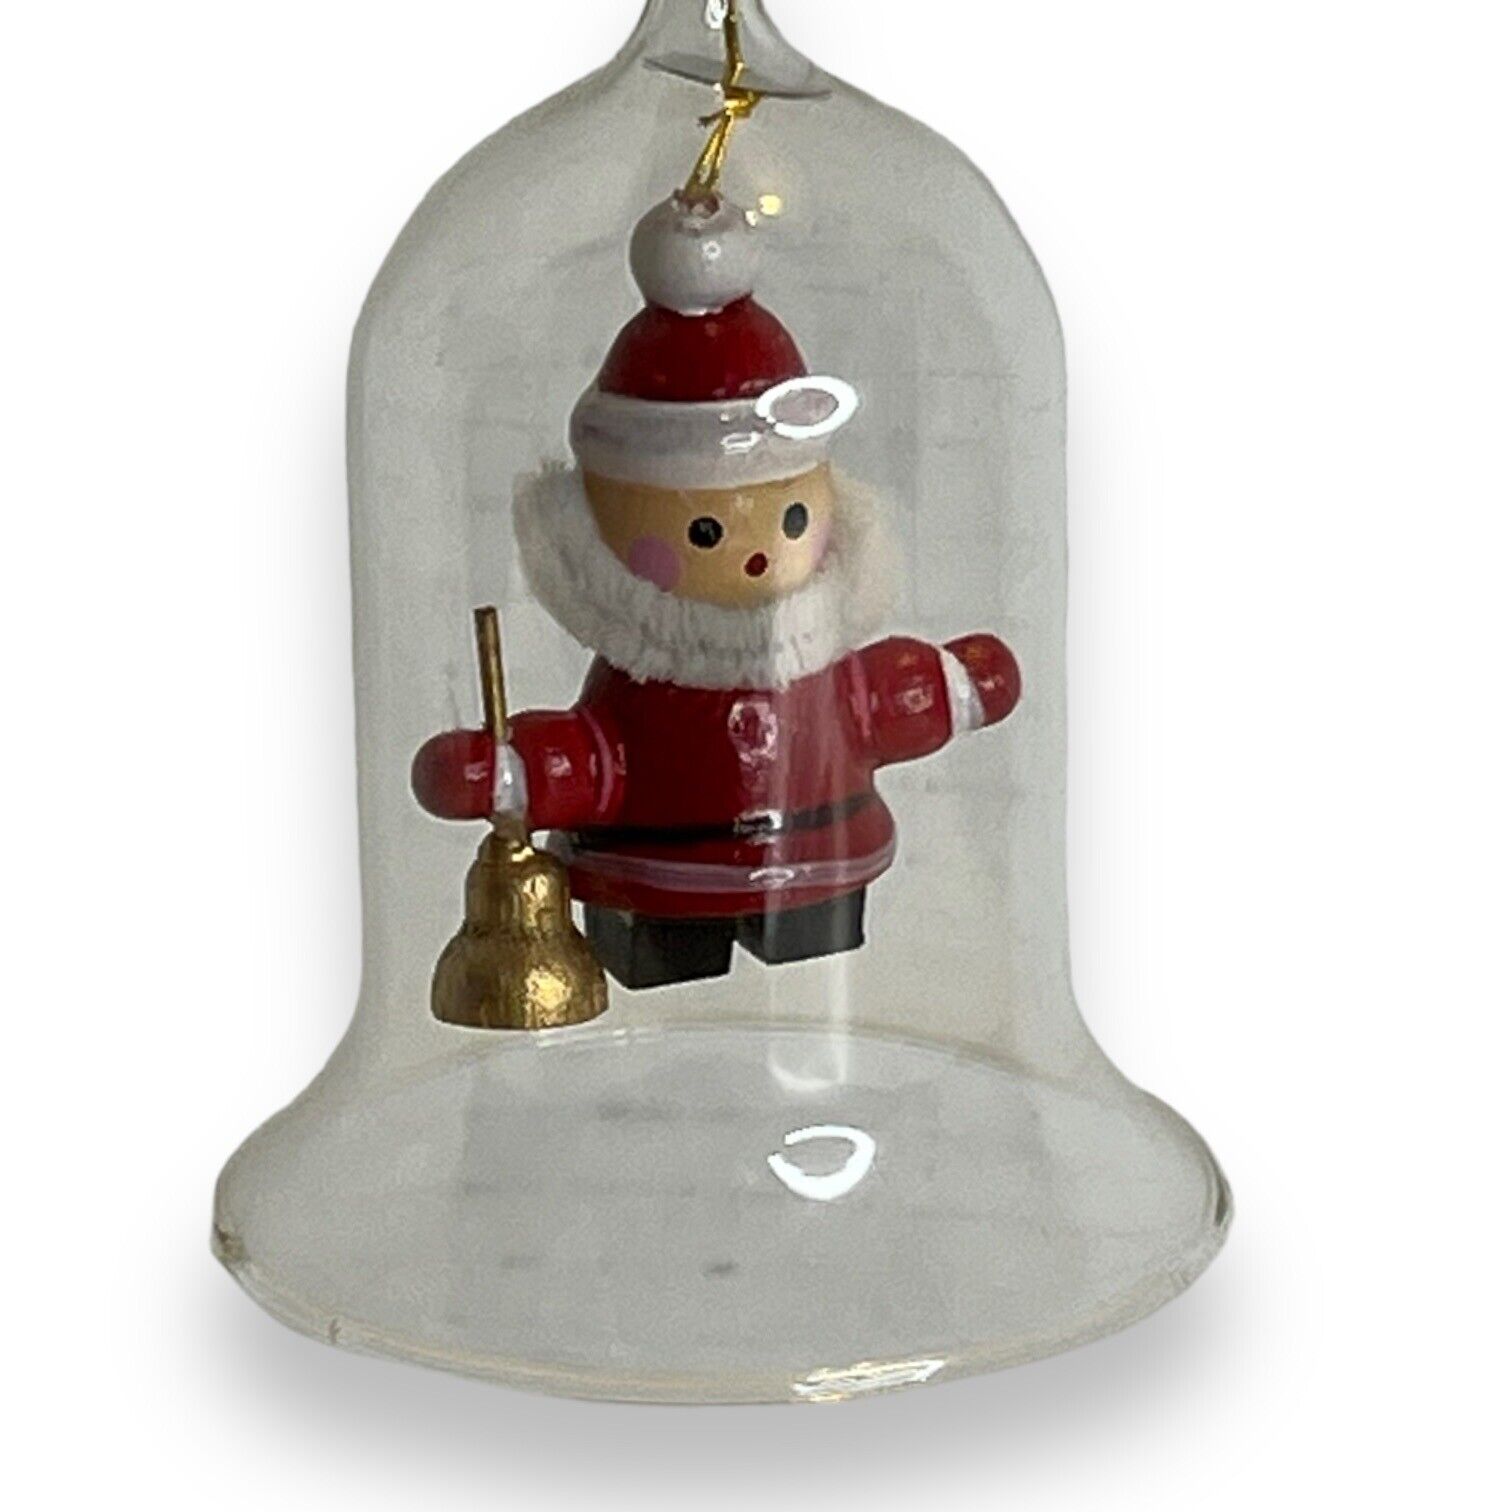 Vintage Wooden Santa Claus in a Glass Bell Christmas Ornament